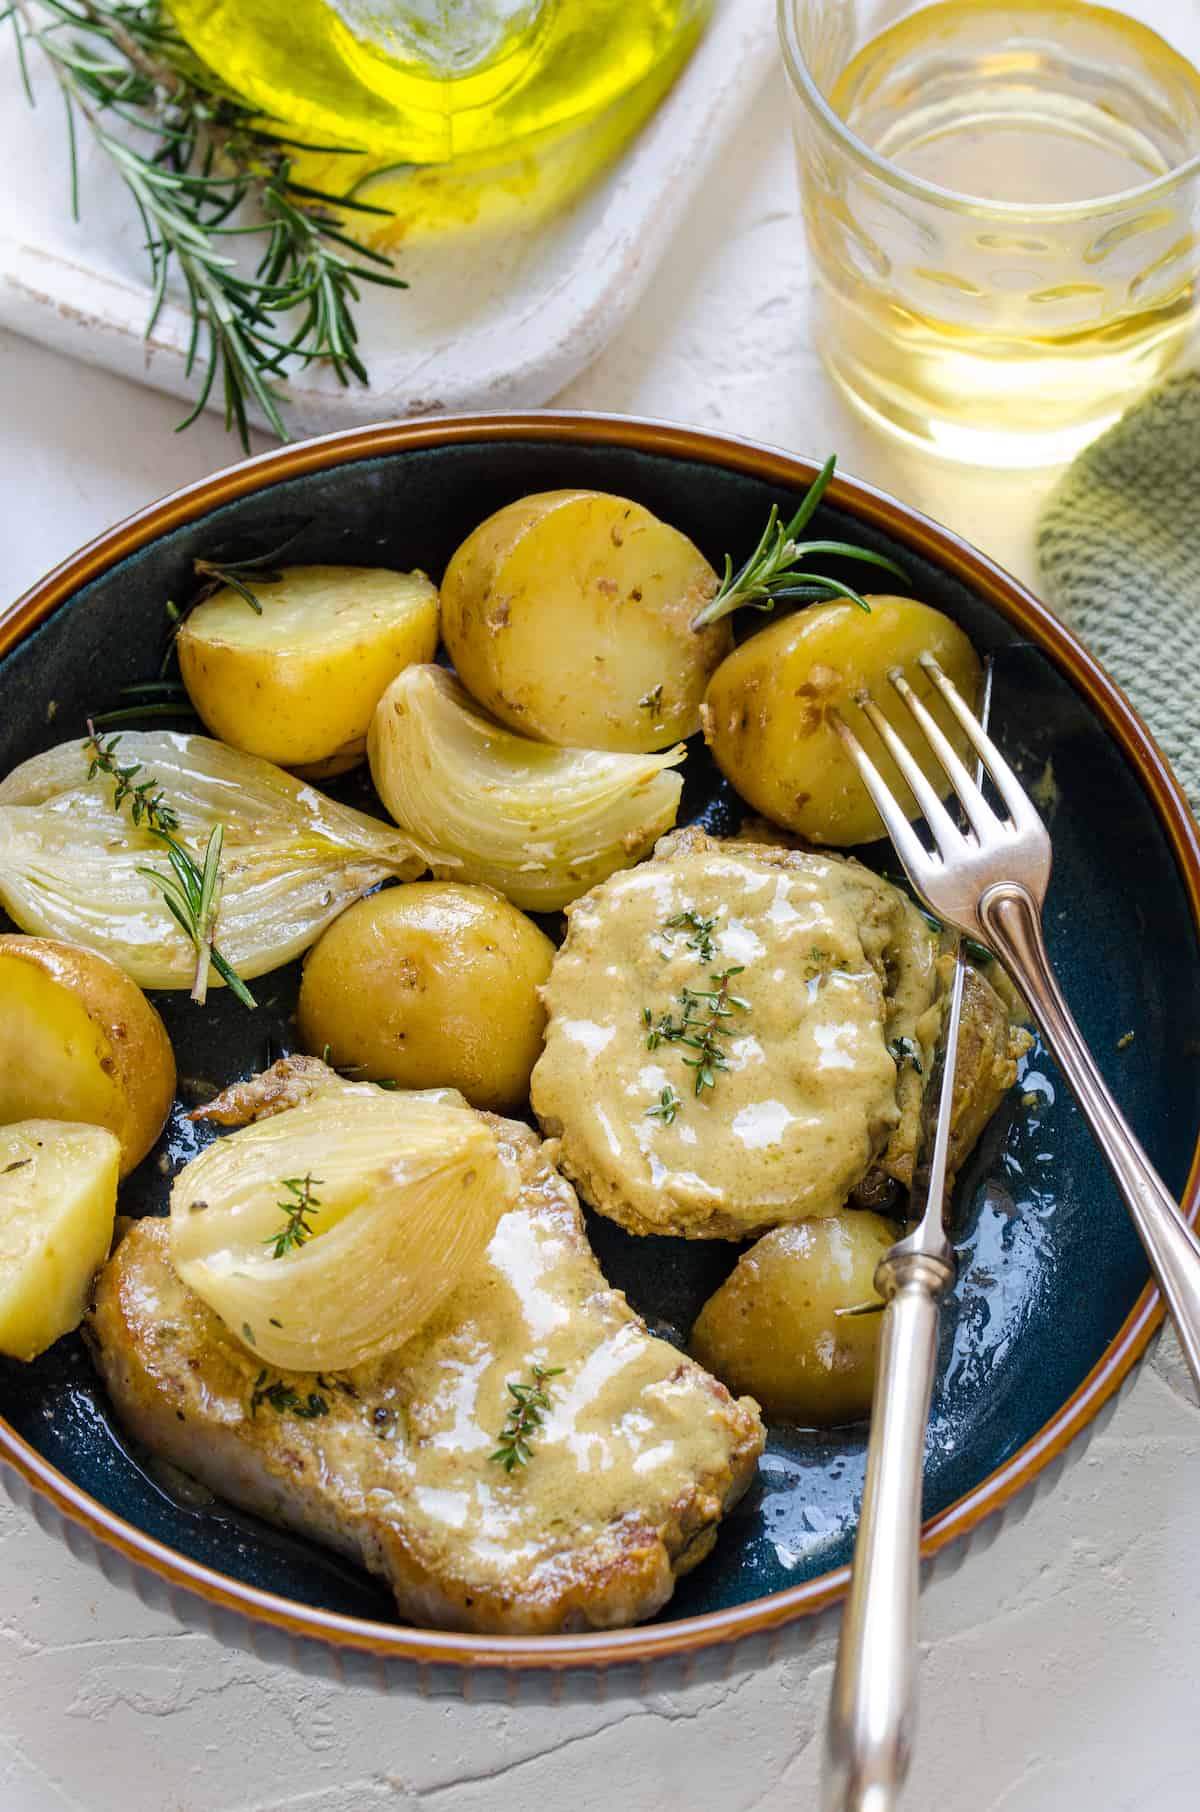 Slow-cooked pork chops, potatoes and onions on a plate beside two sprigs of rosemary and a glass of wine